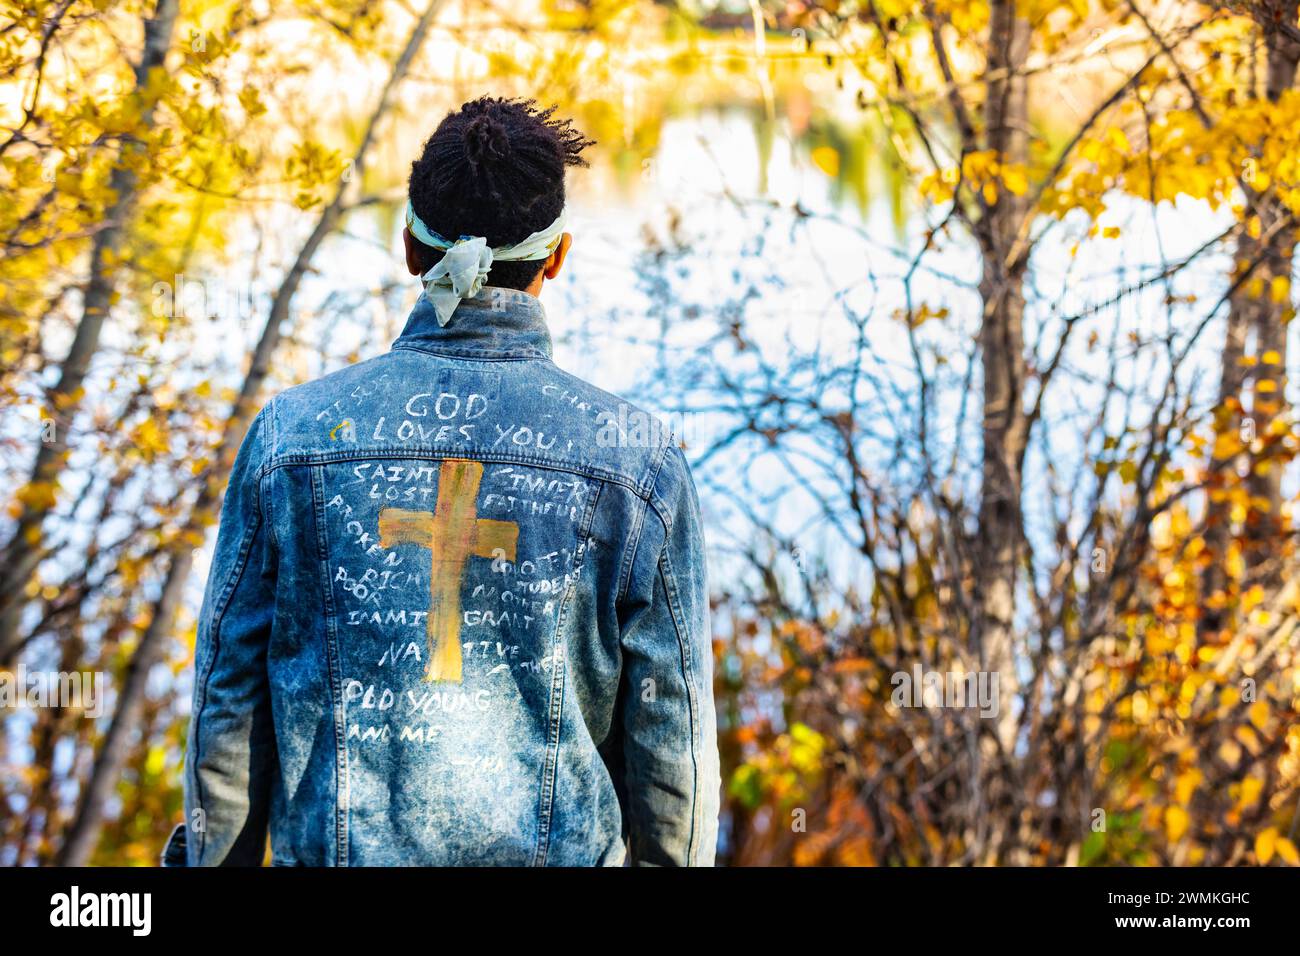 Close-up view from behind of a man wearing a jean jacket with hand-written Christian references during a fall outing in a city park, standing by a ... Stock Photo